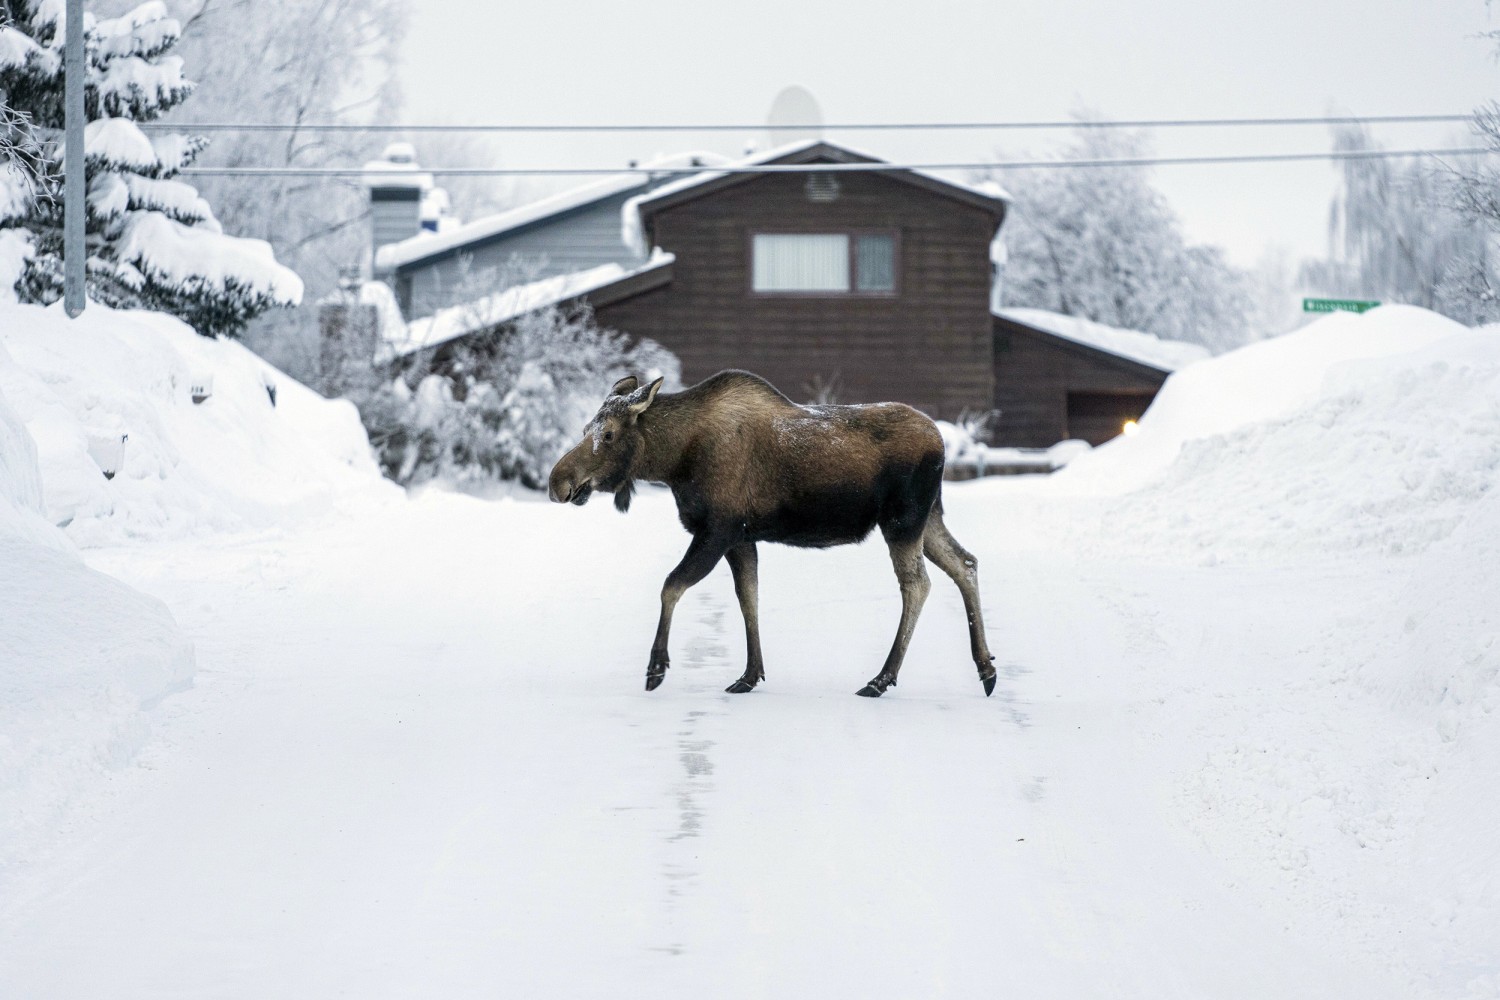 It's so cold and snowy in Alaska that fuel oil is thickening and roofs are  collapsing